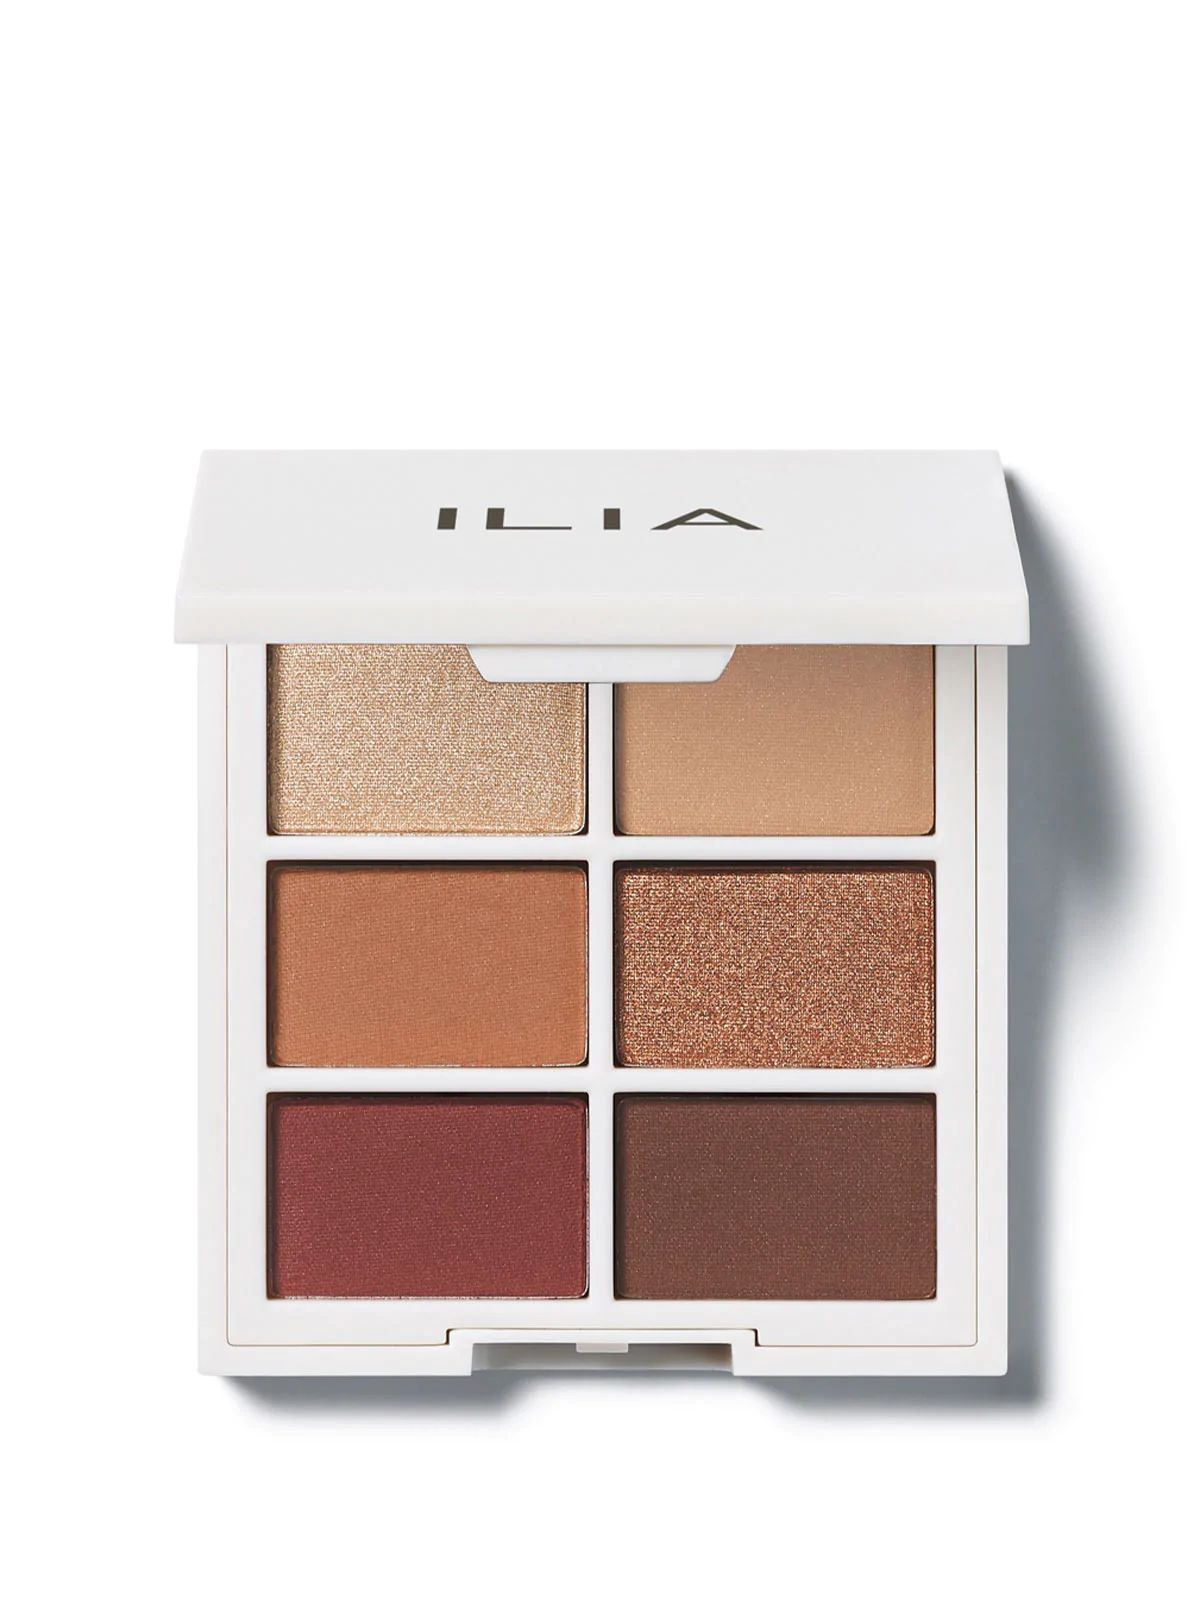 The Necessary Eyeshadow Palette - Clean, Natural Eyeshadows in Warm Nude Colors | ILIA Beauty